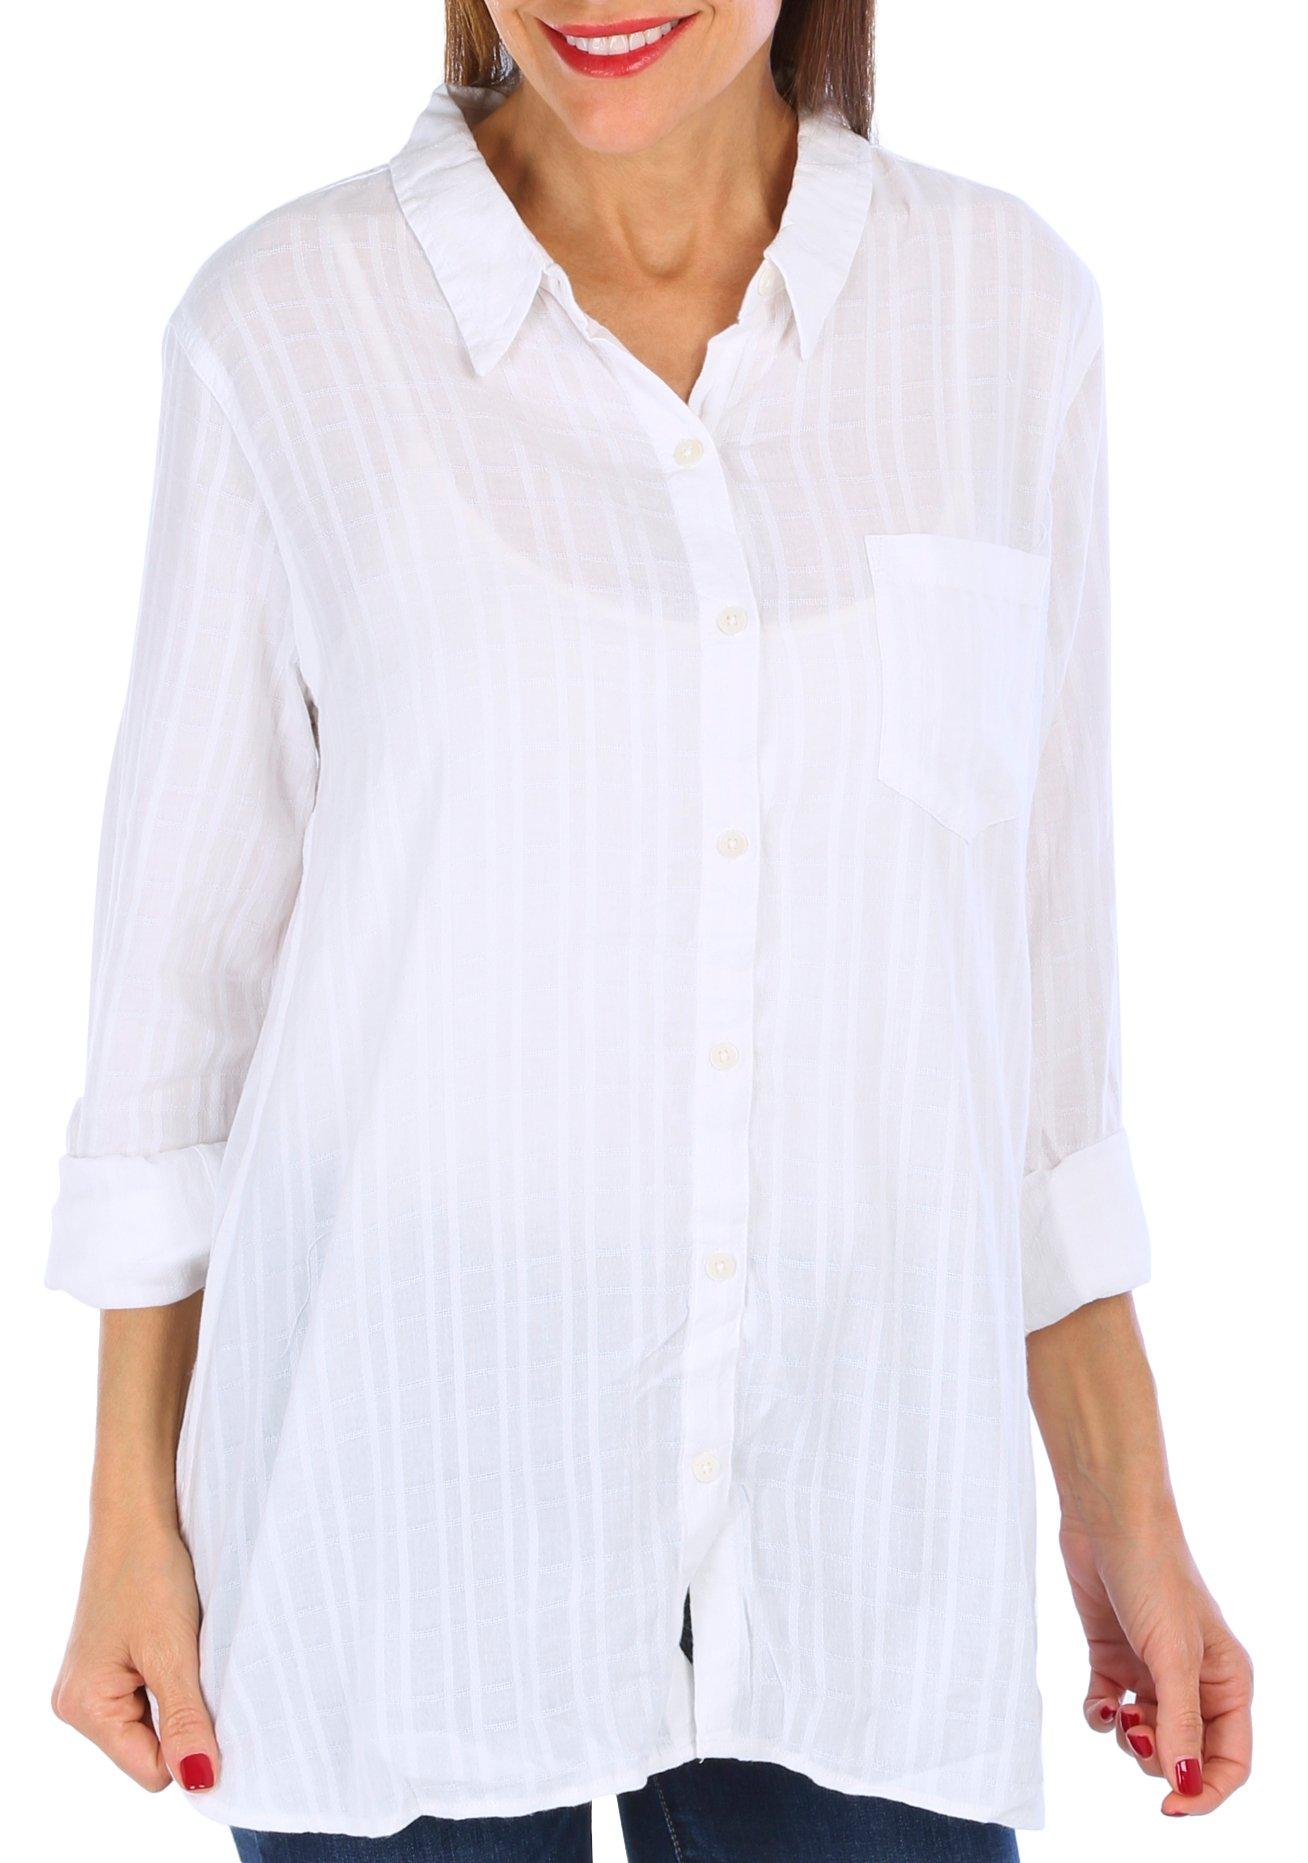 Womens Long Sleeve Solid Button Down Top